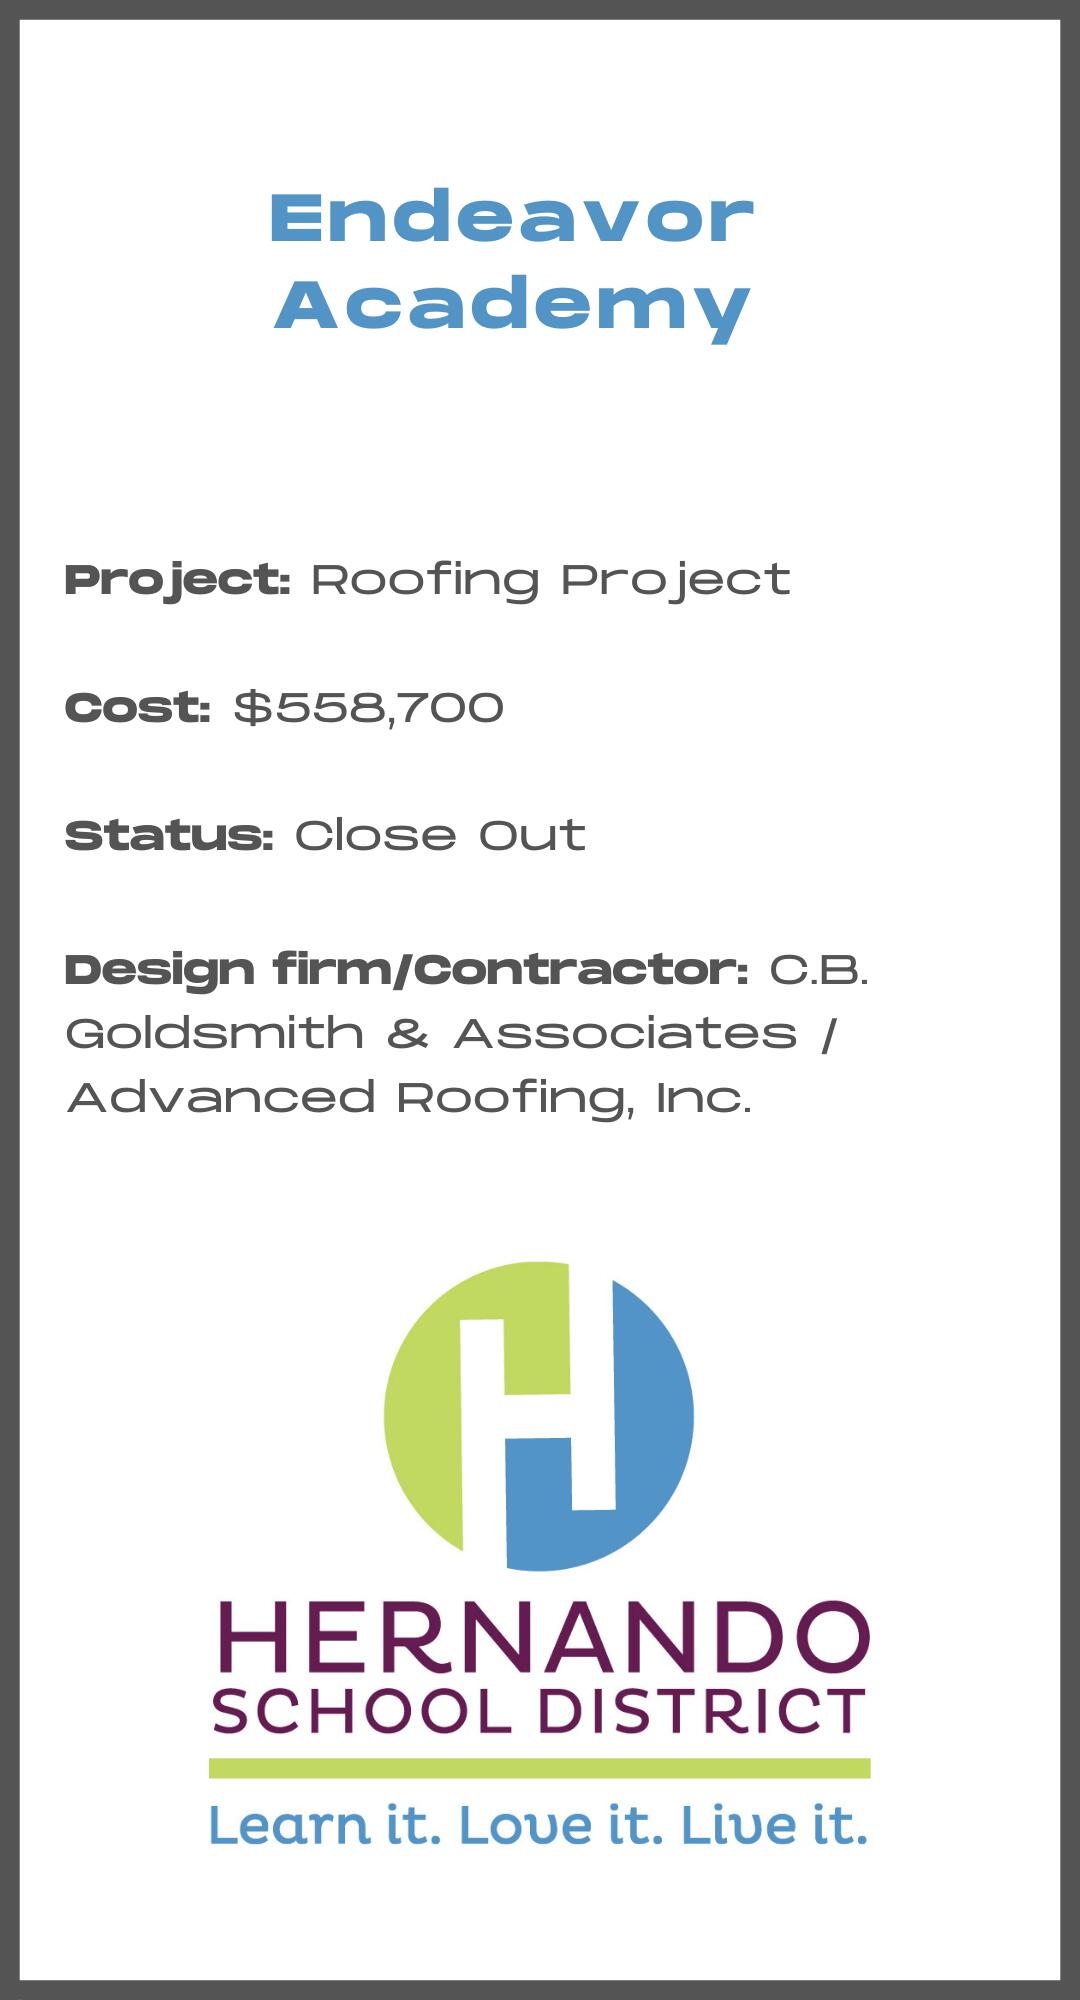 Endeavor Roofing Porject